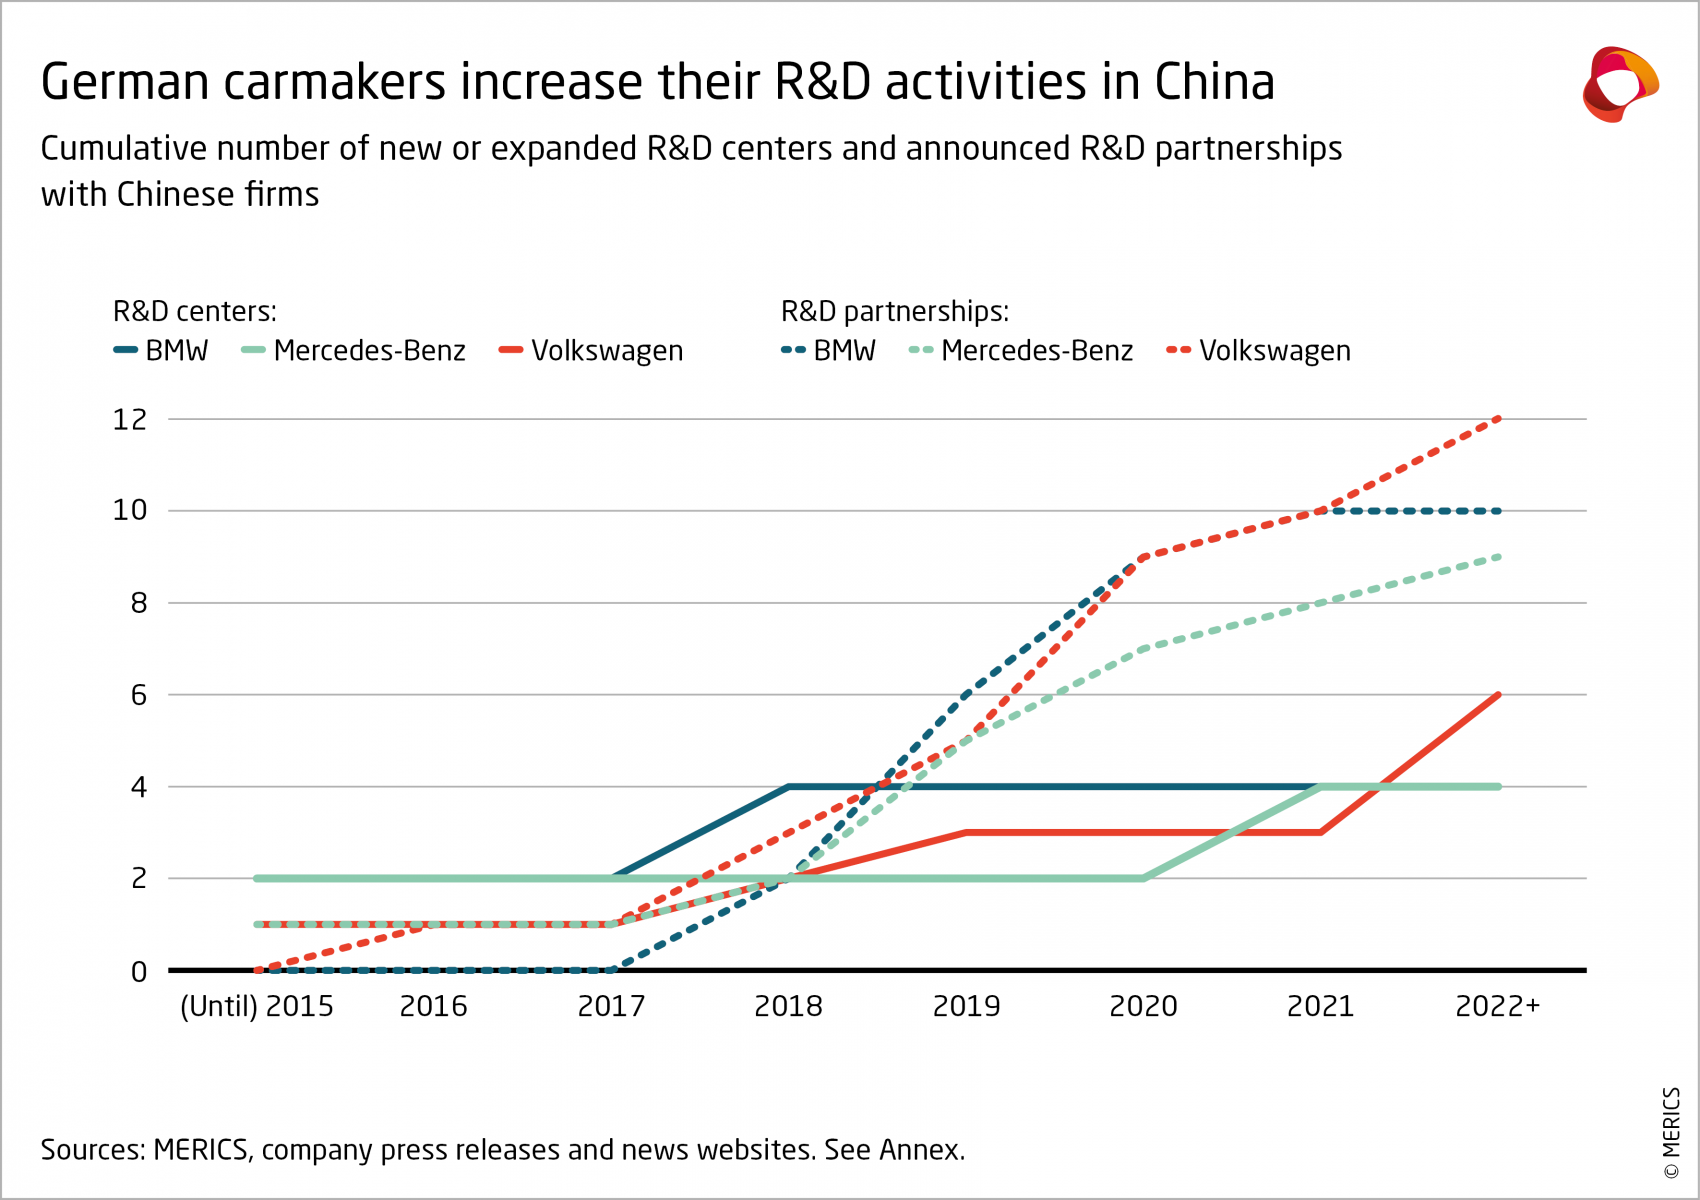 German carmakers increase their R&D activities in China